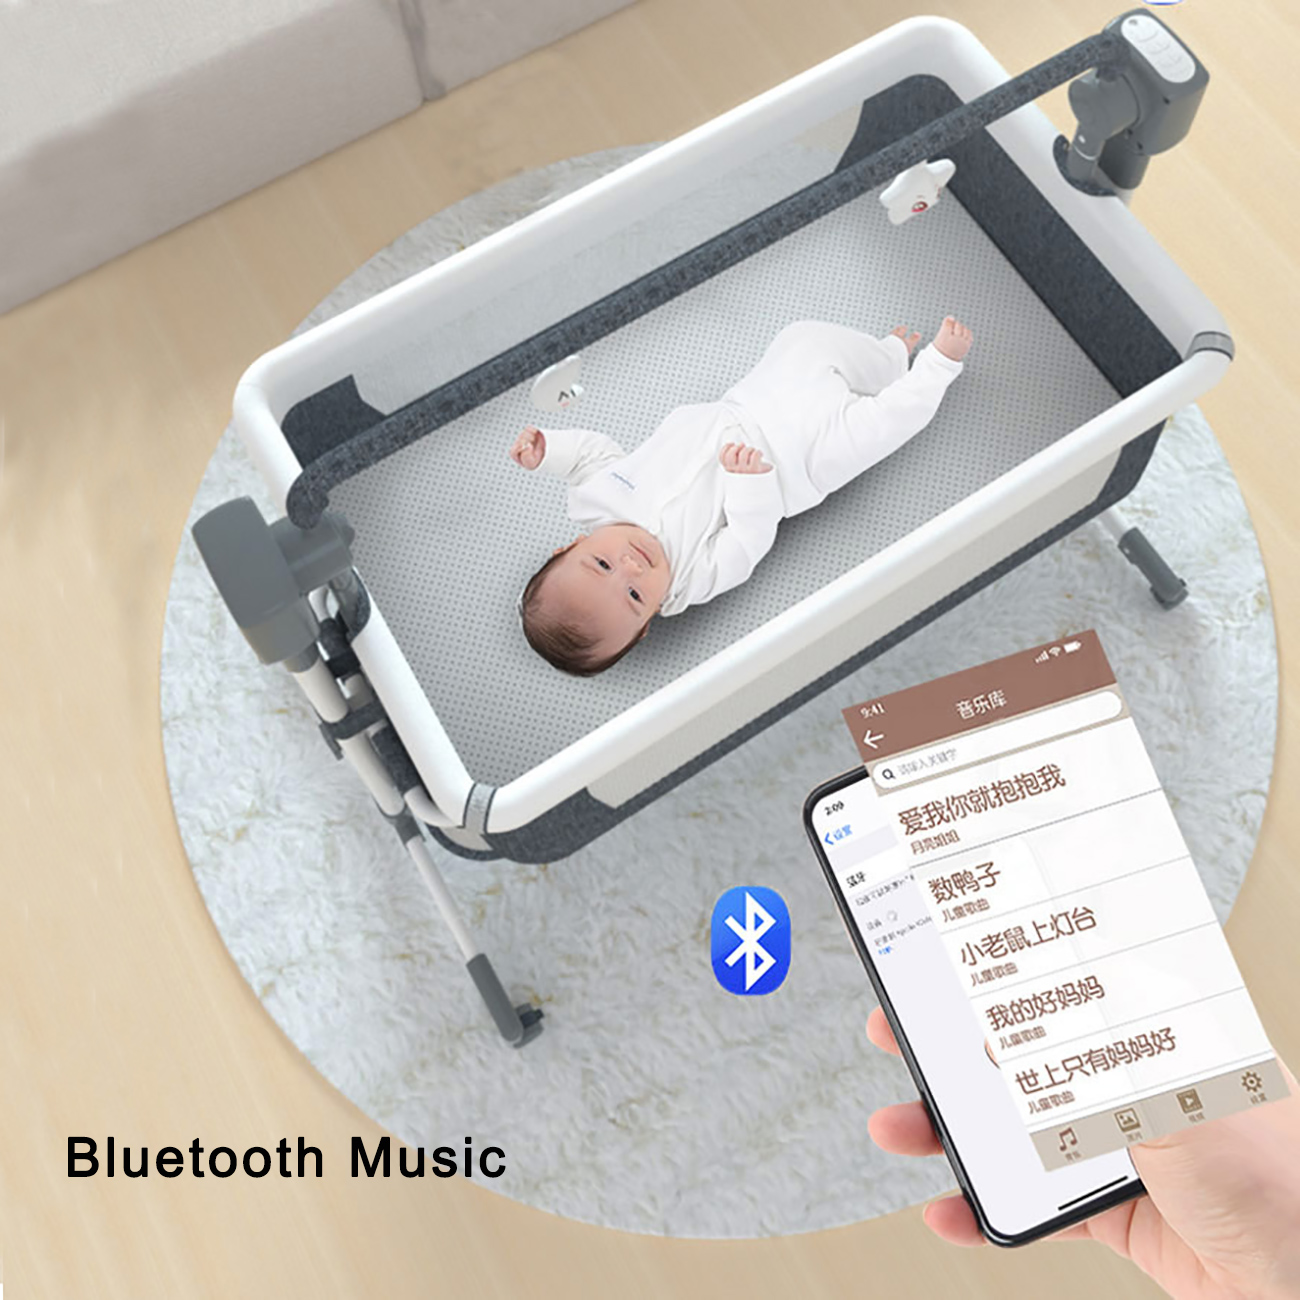 Newborn Cribs with Bluetooth Music Infant Bedside Bed Electric Rocking Baby Bed with Height Adjustable - image 4 of 10